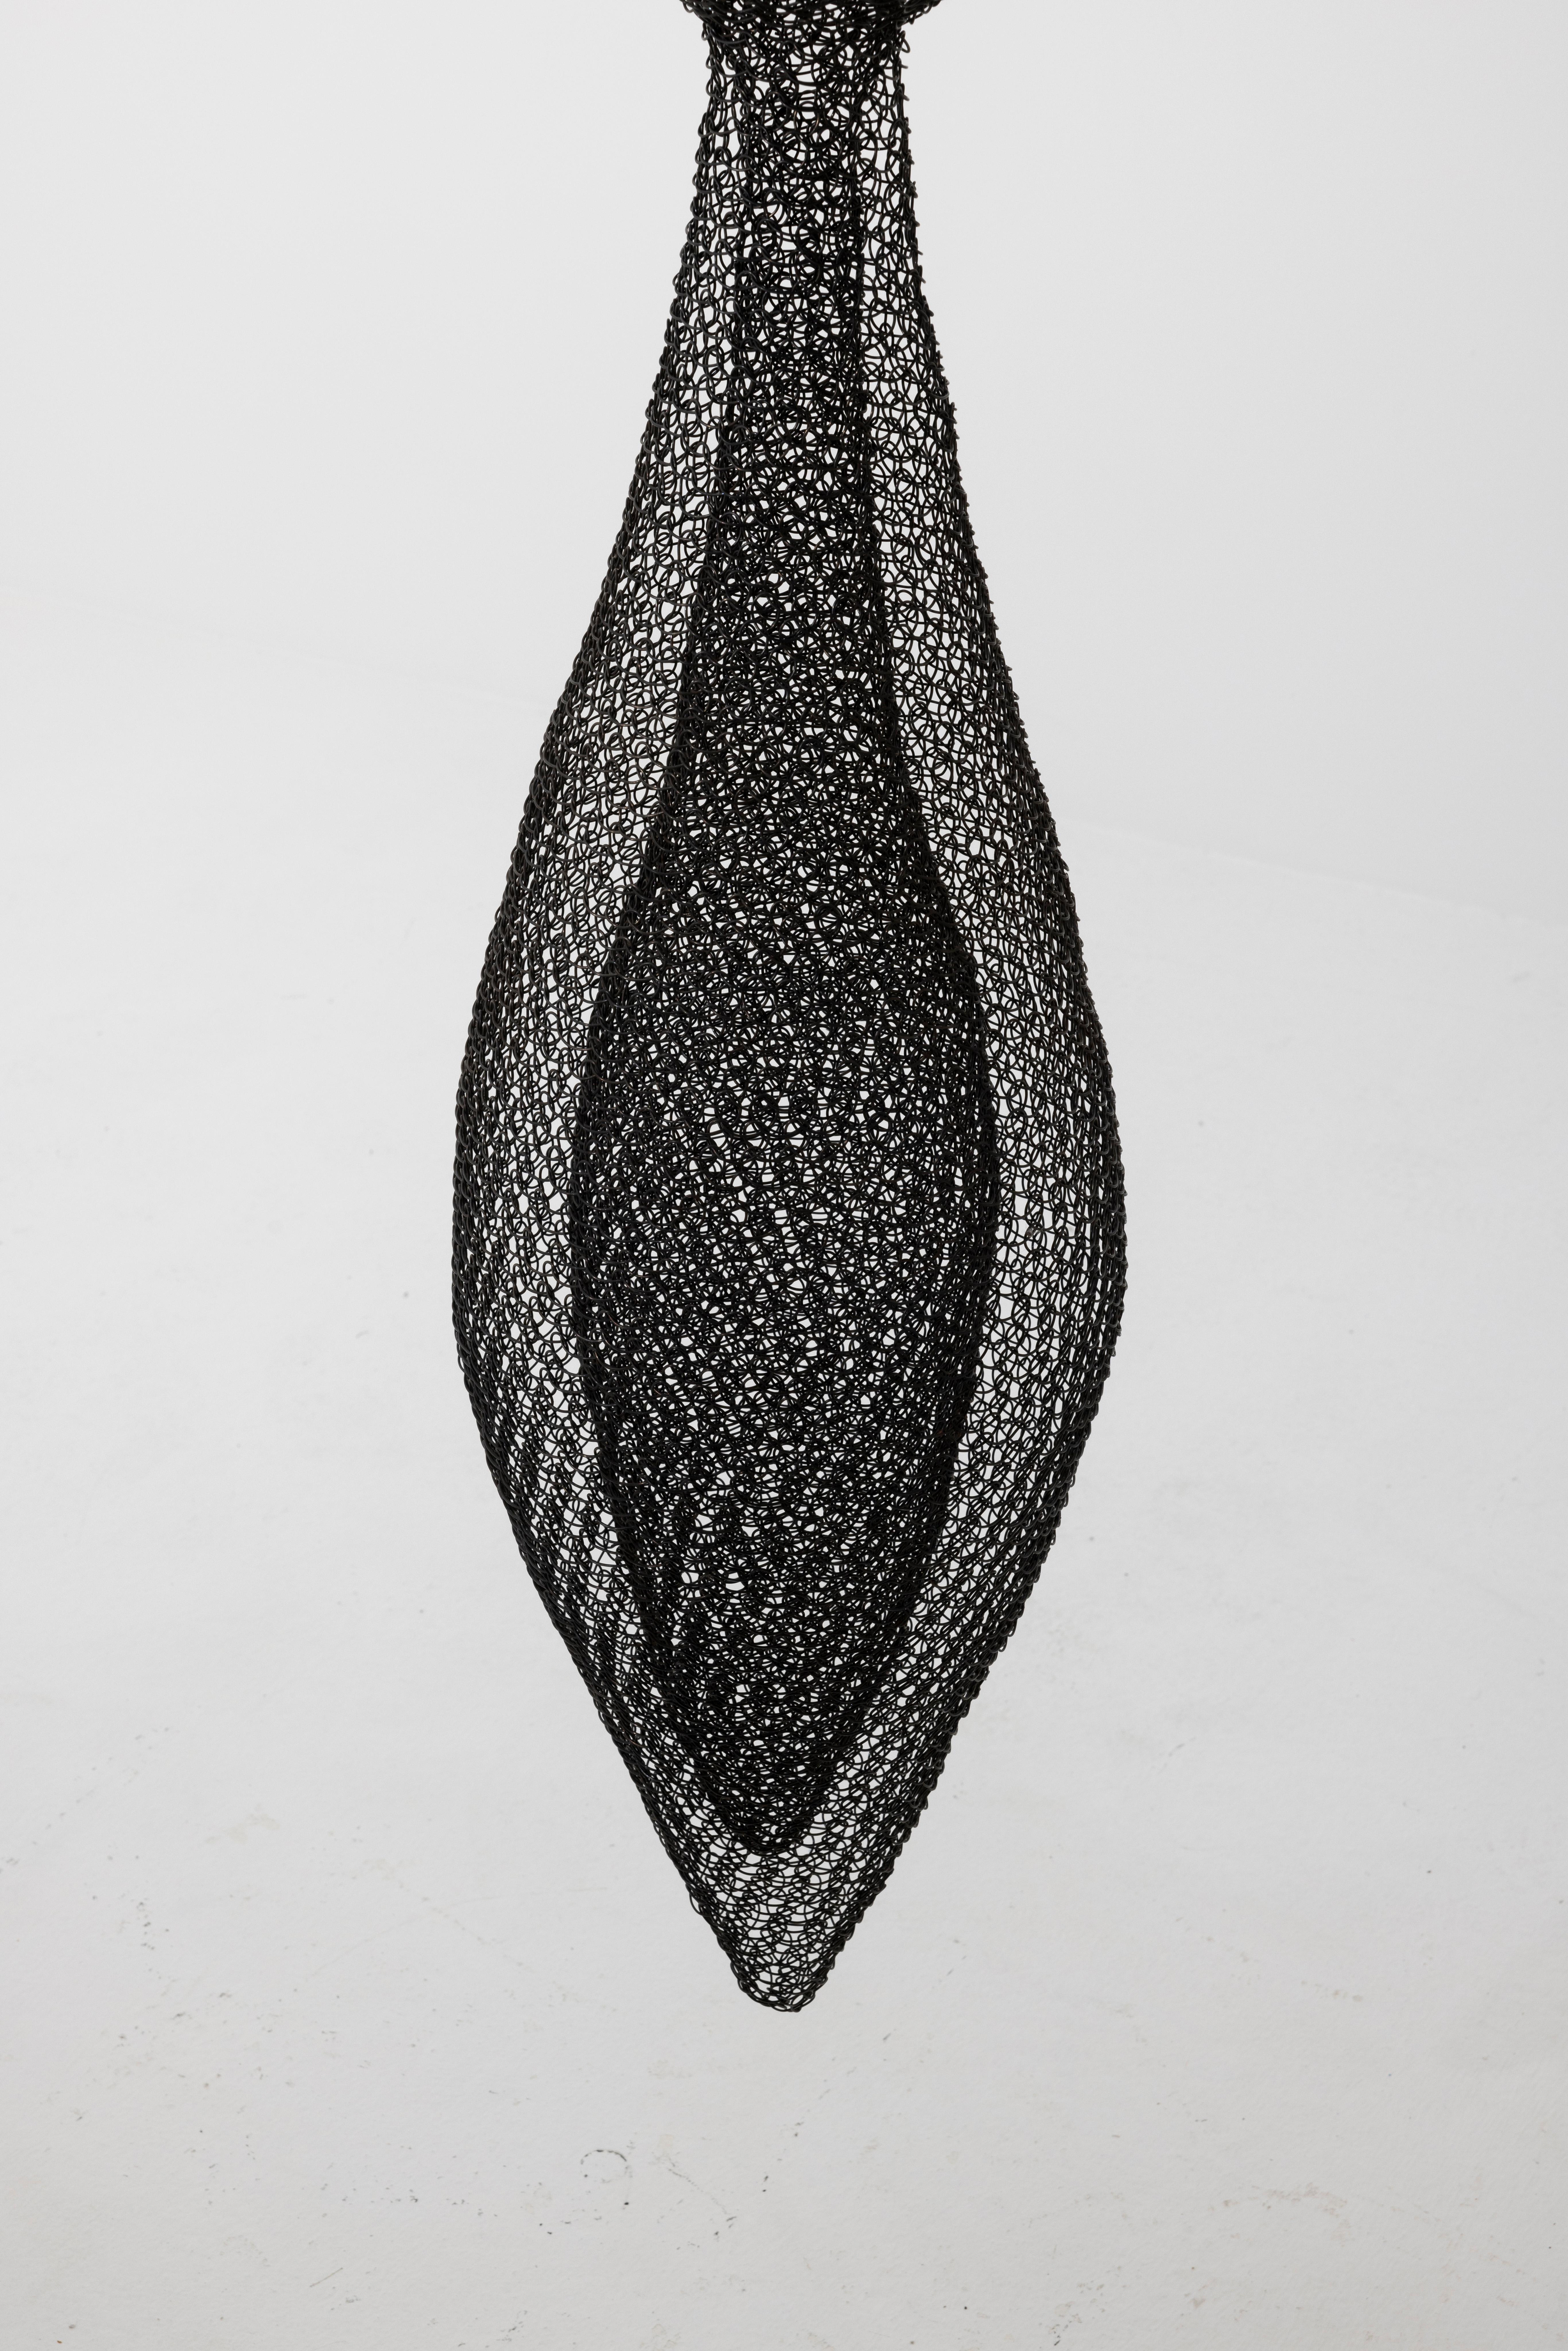 Contemporary Hanging Hand-Woven Wire Sculpture, France In New Condition For Sale In London, GB